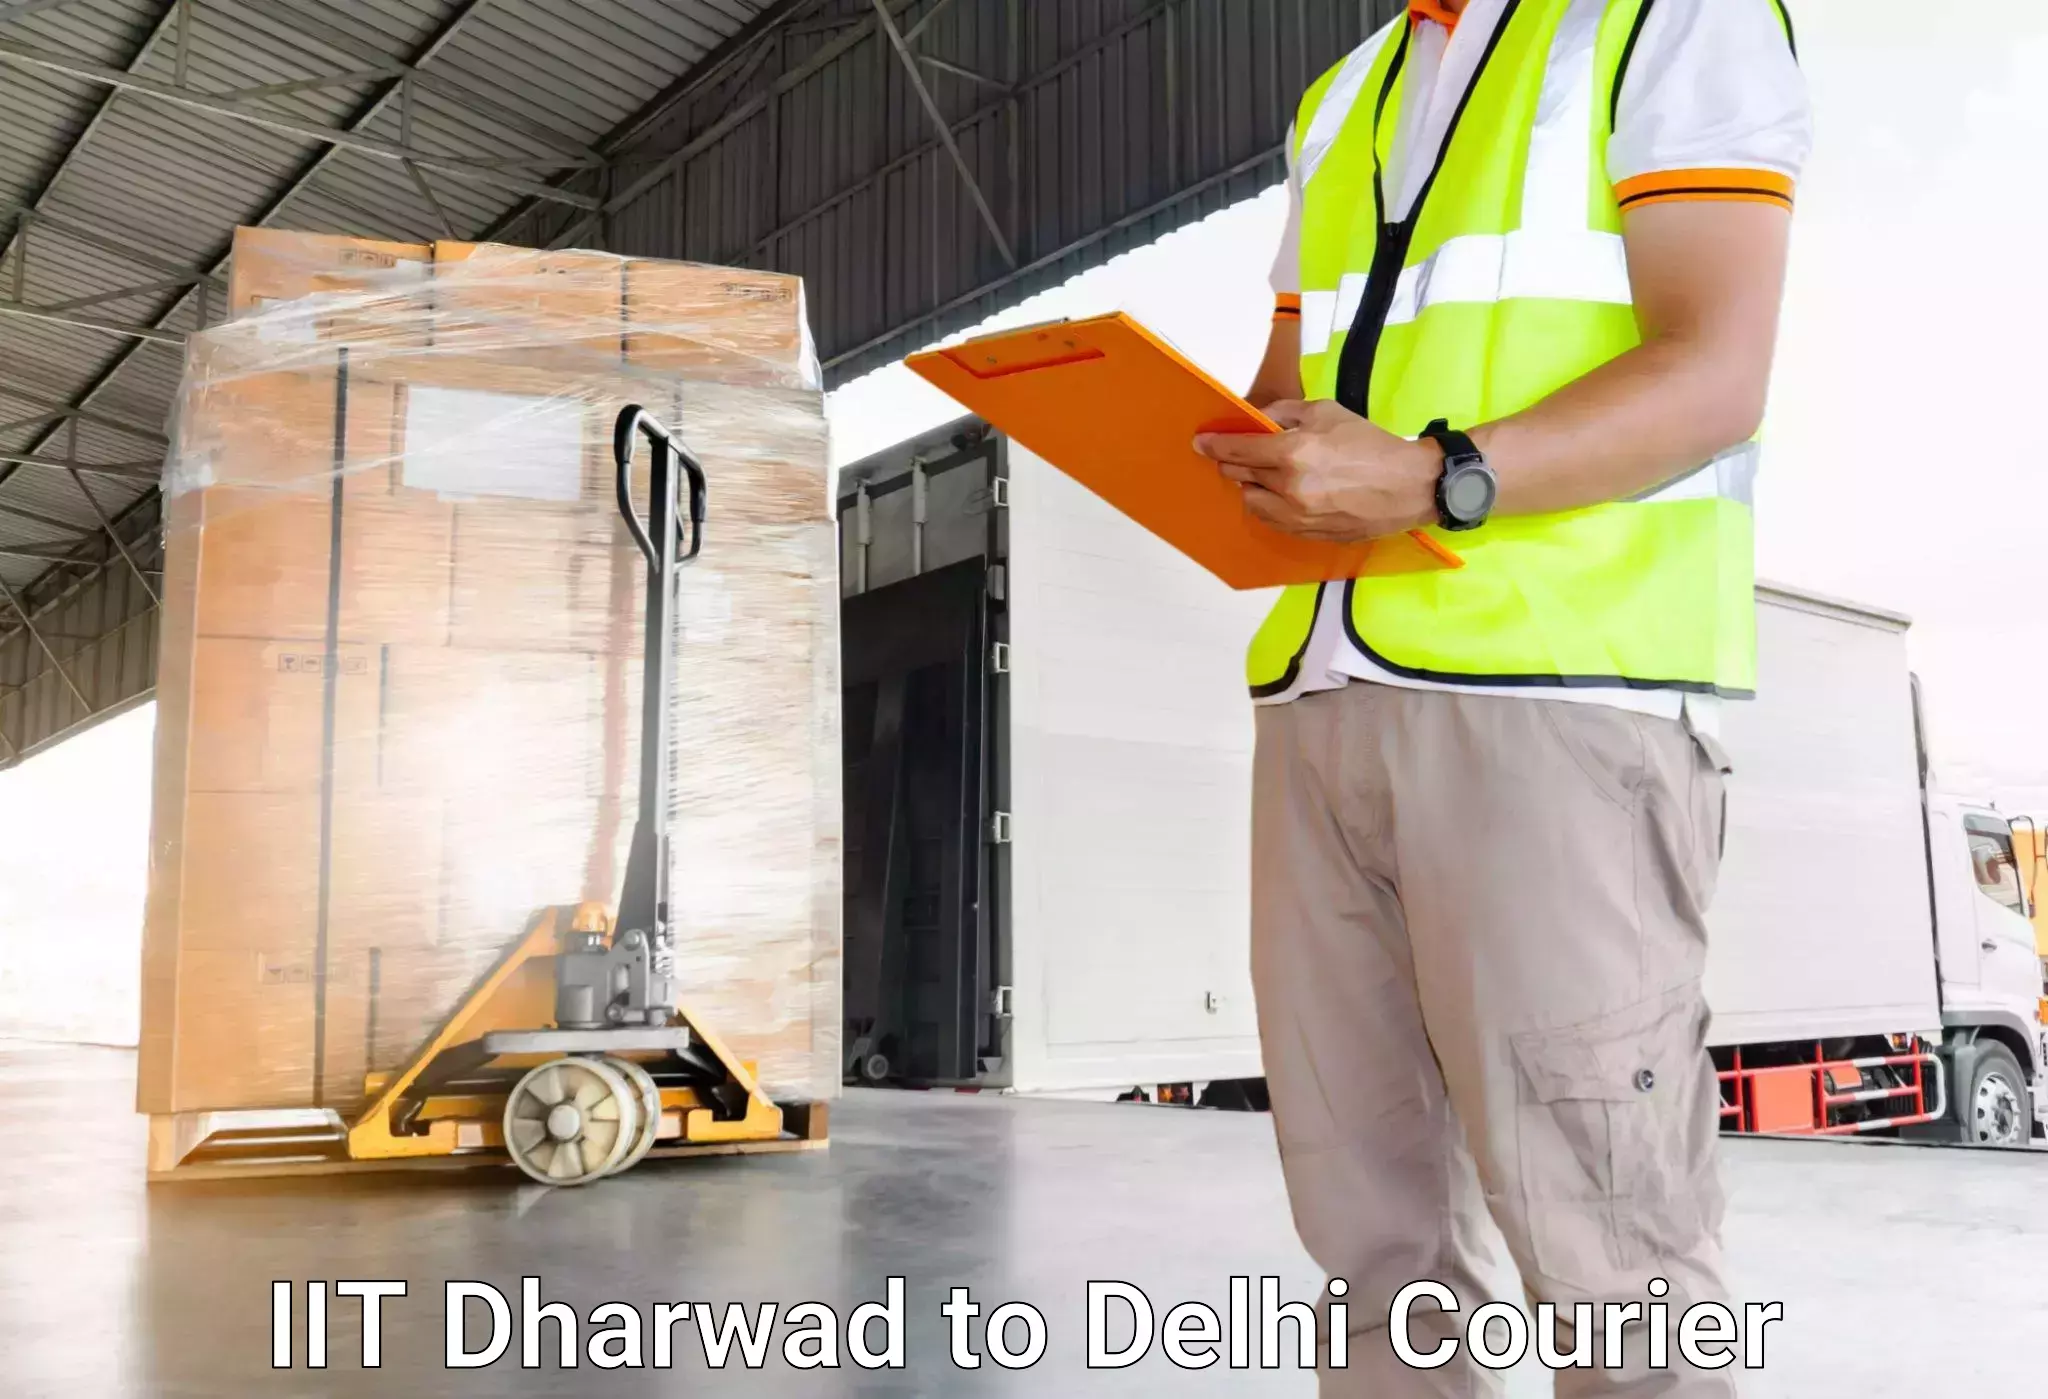 Express baggage shipping IIT Dharwad to Delhi Technological University DTU